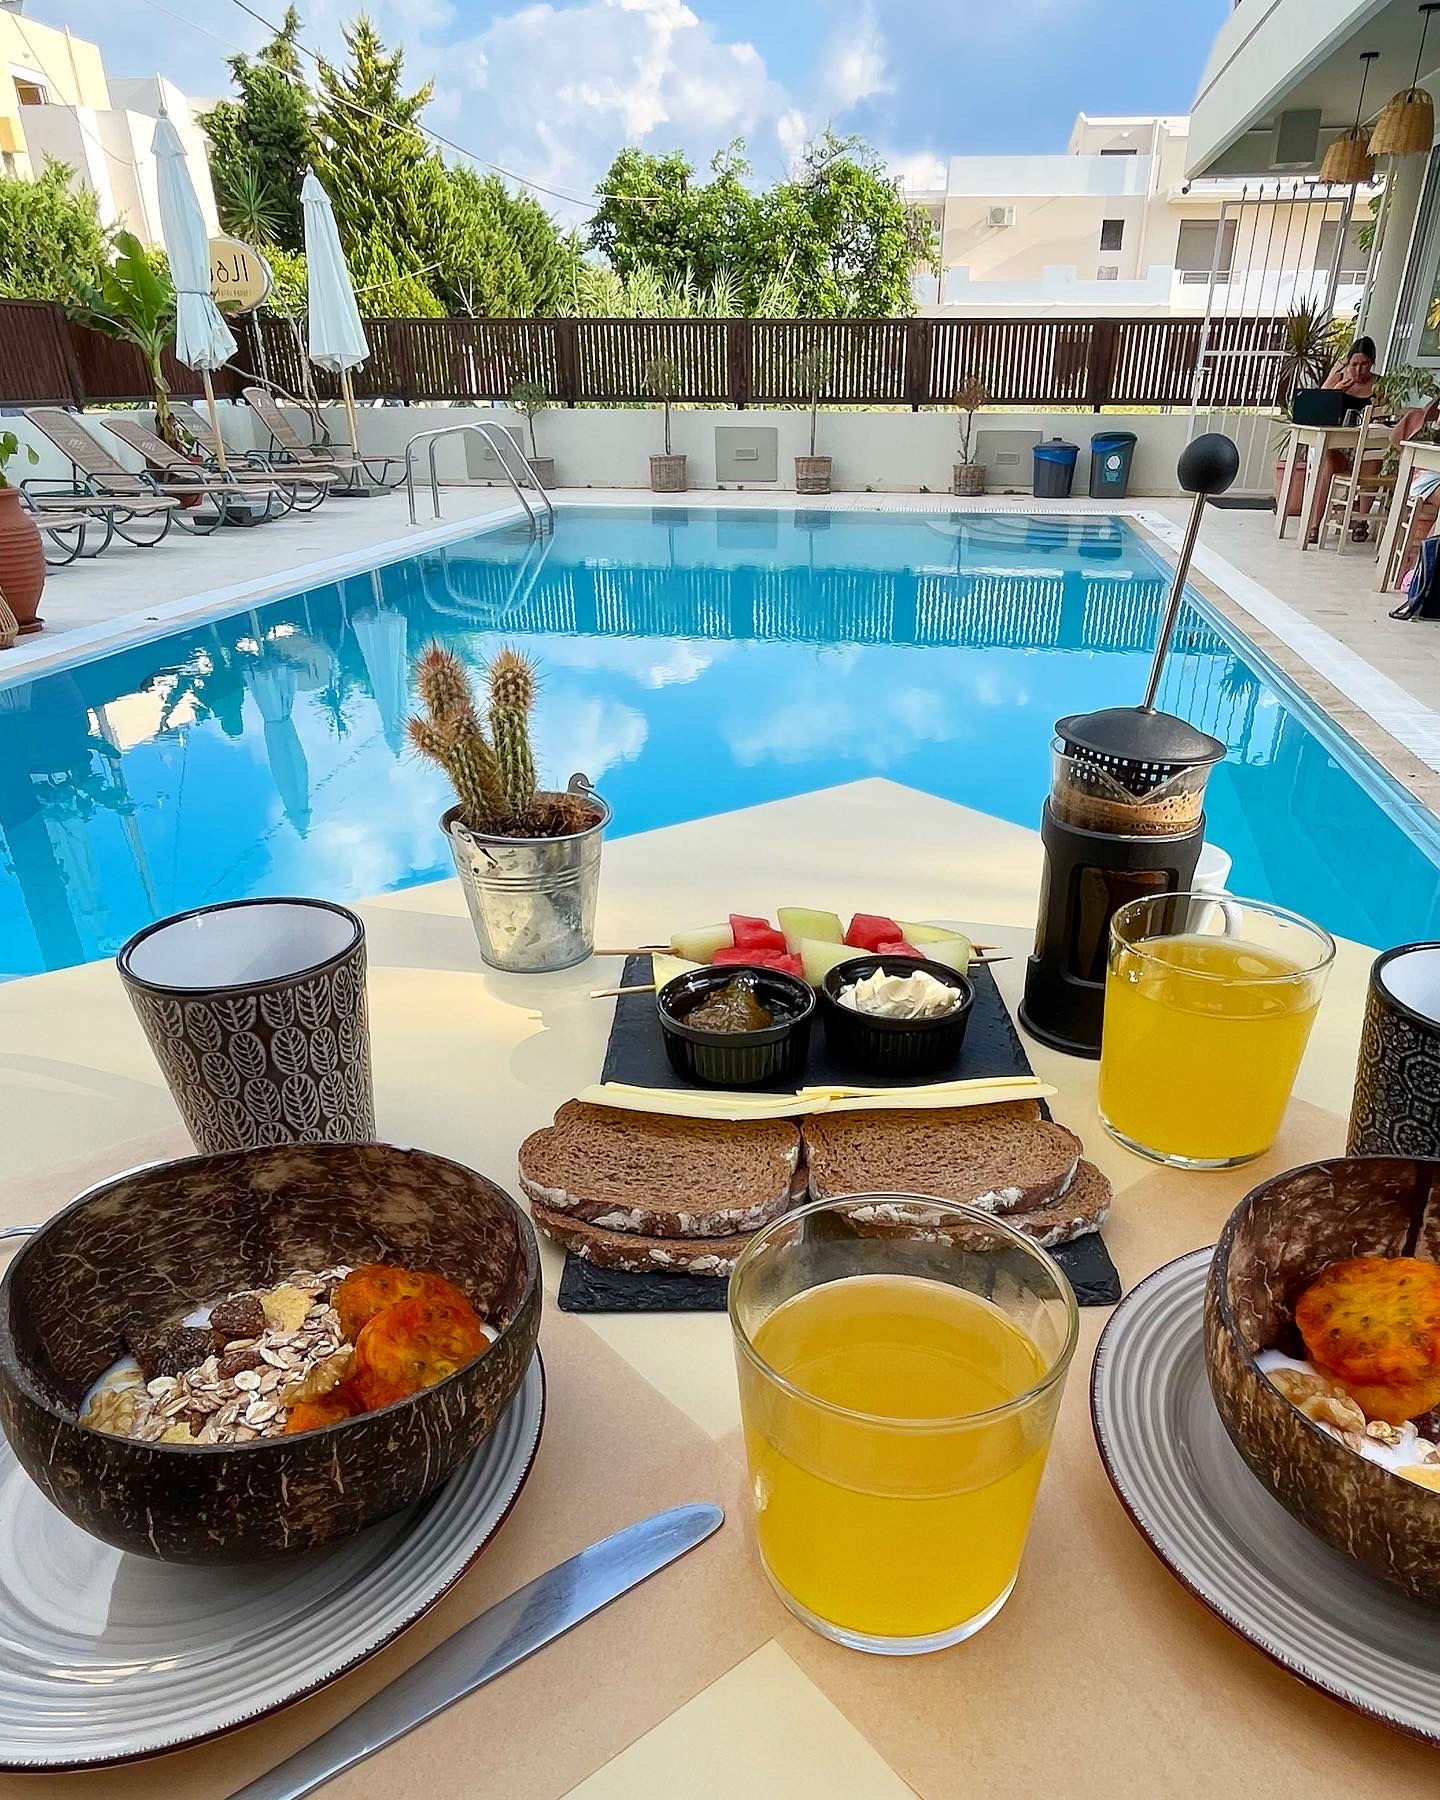 Breakfast by the poolside at Goji Vegan Hotel - yoghurt bowls, bread and cheese, French press coffee